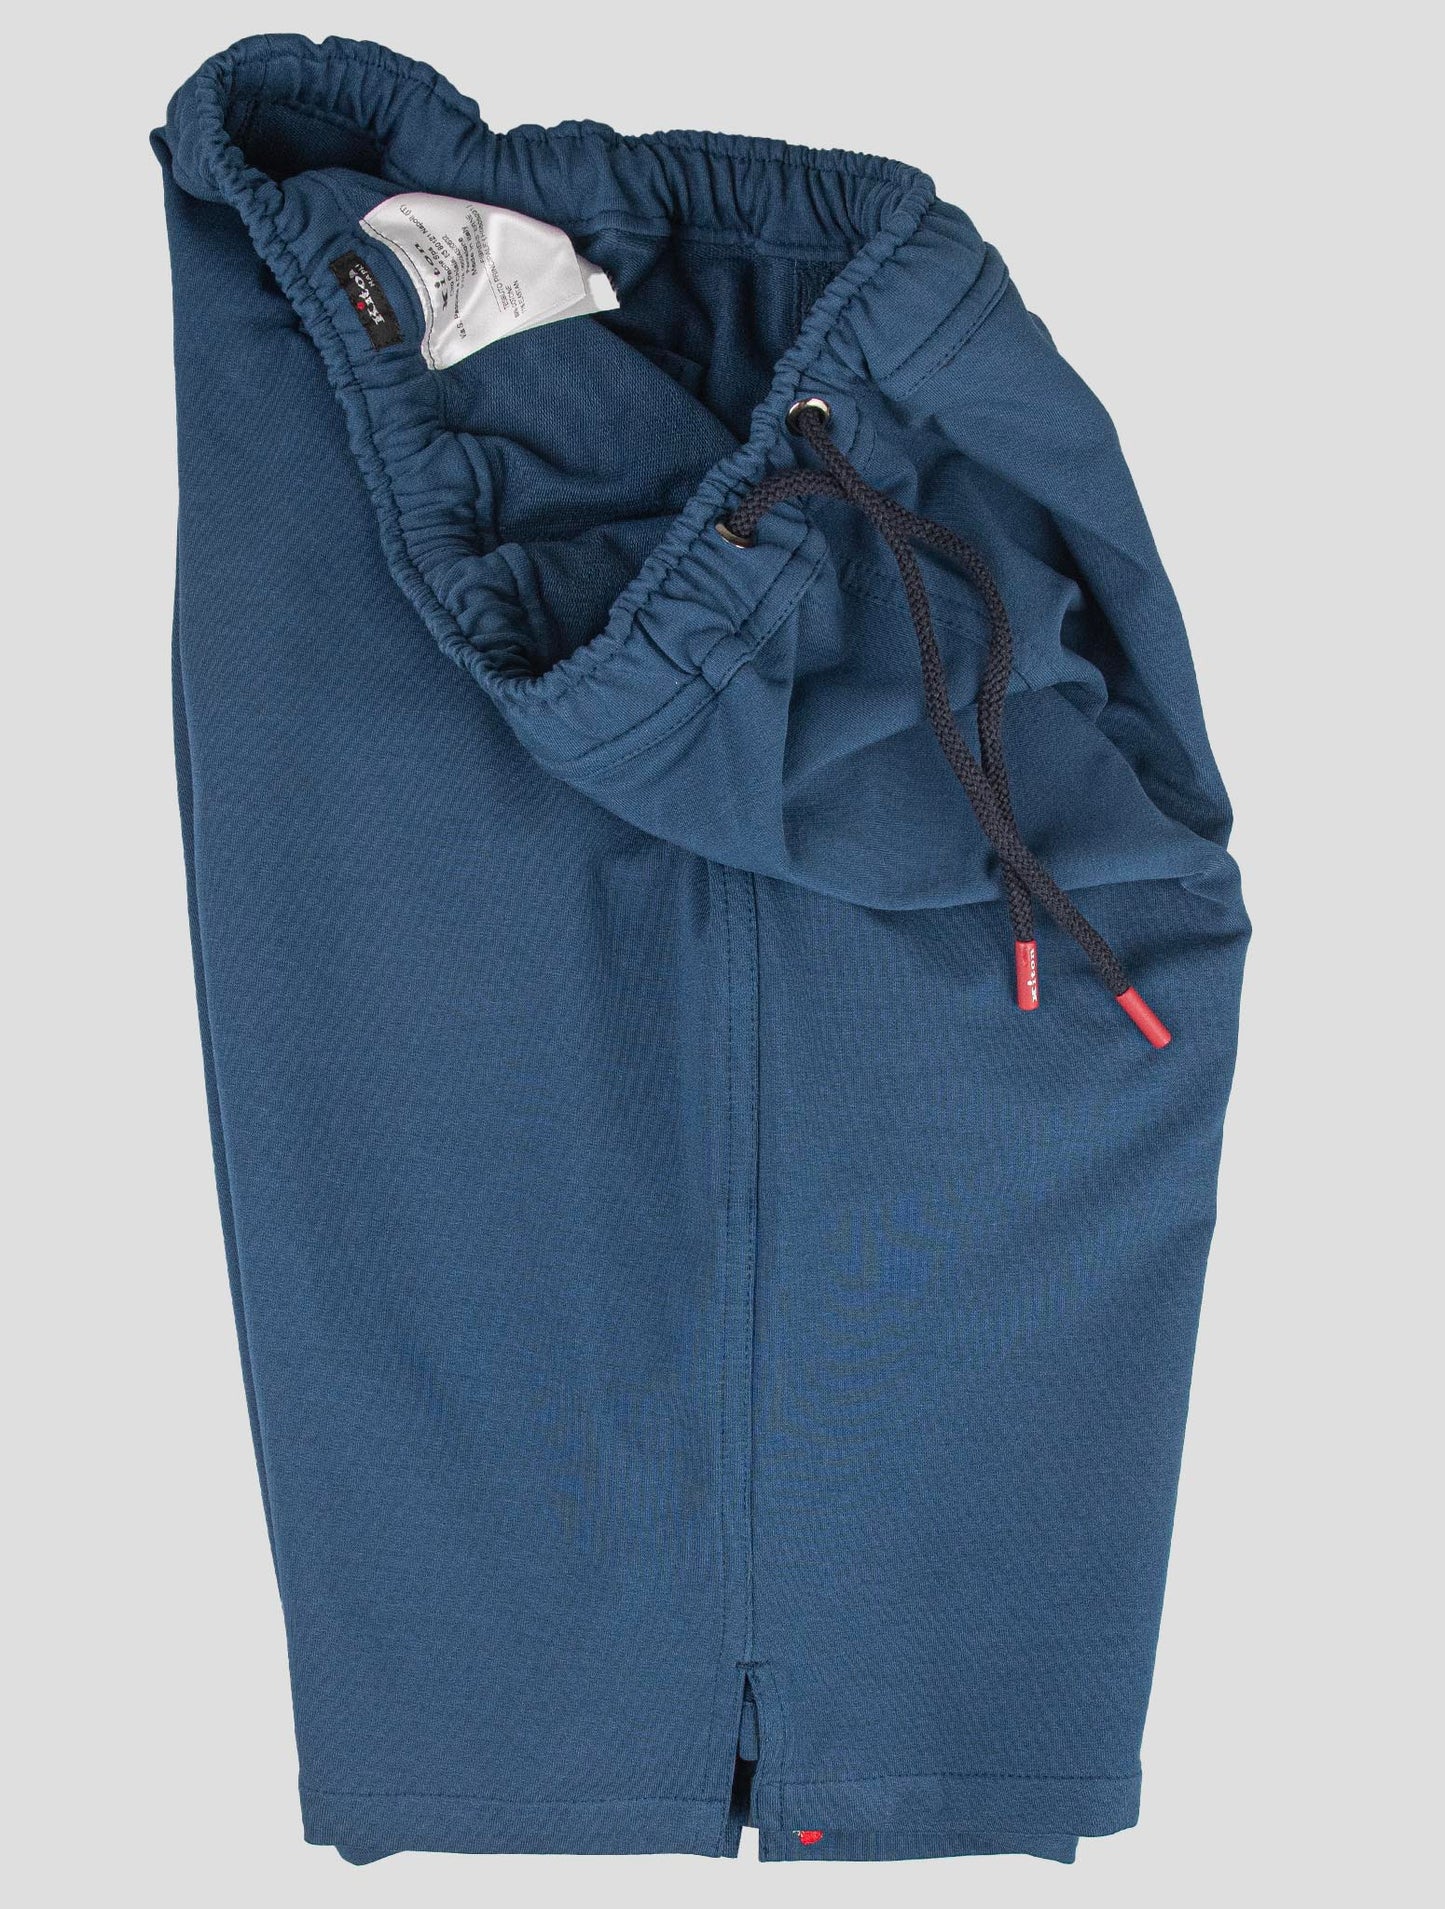 Kiton Matching Outfit - Blue Mariano and Blue Short Pants Tracksuit